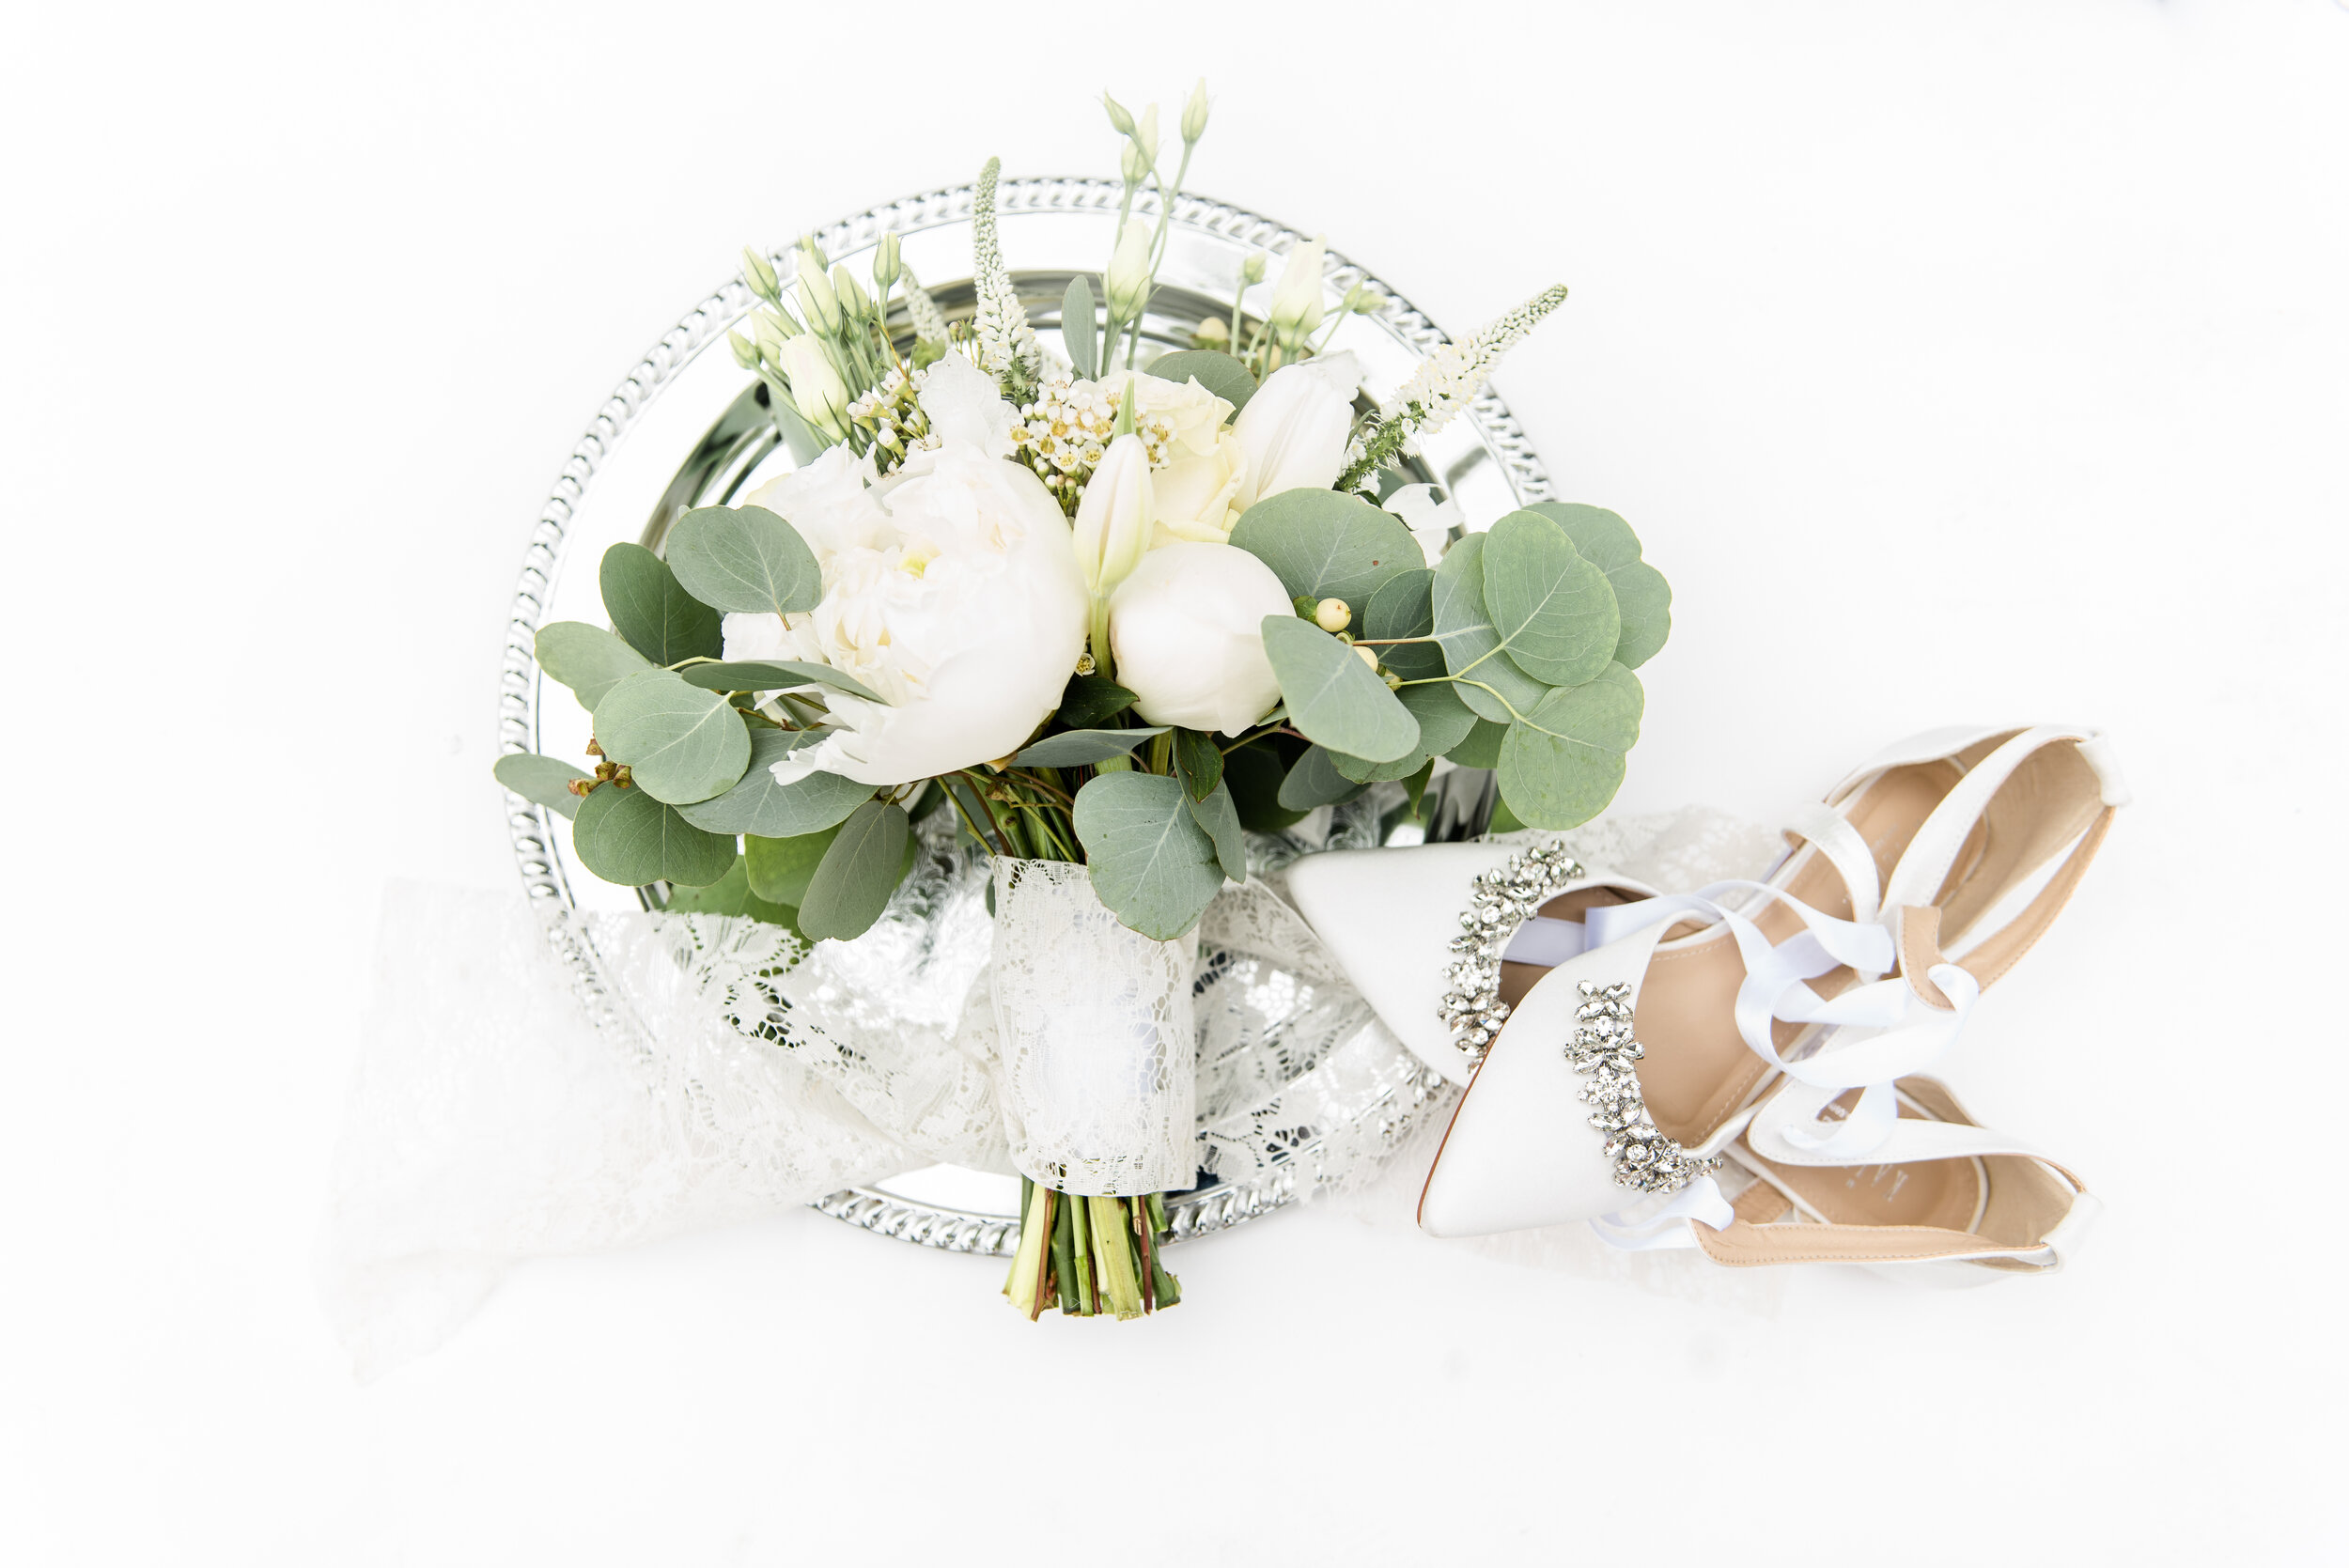 silver platter with wedding bouquet and white bridal shoes